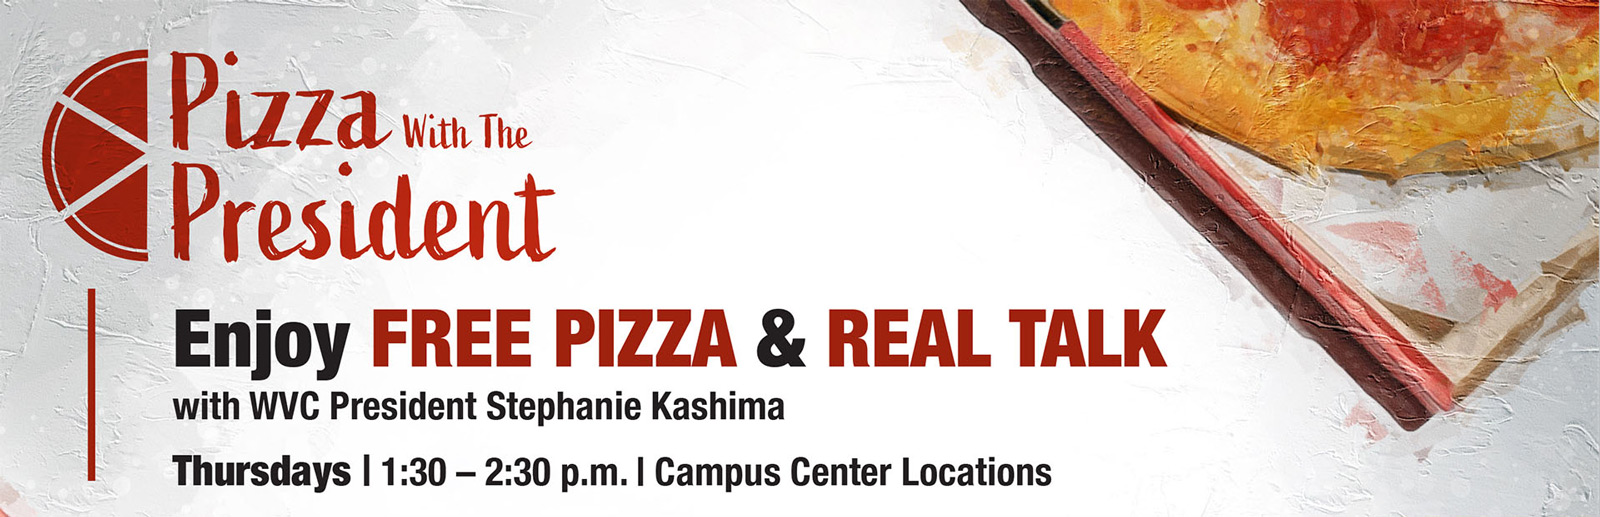 Pizza with the President event with details